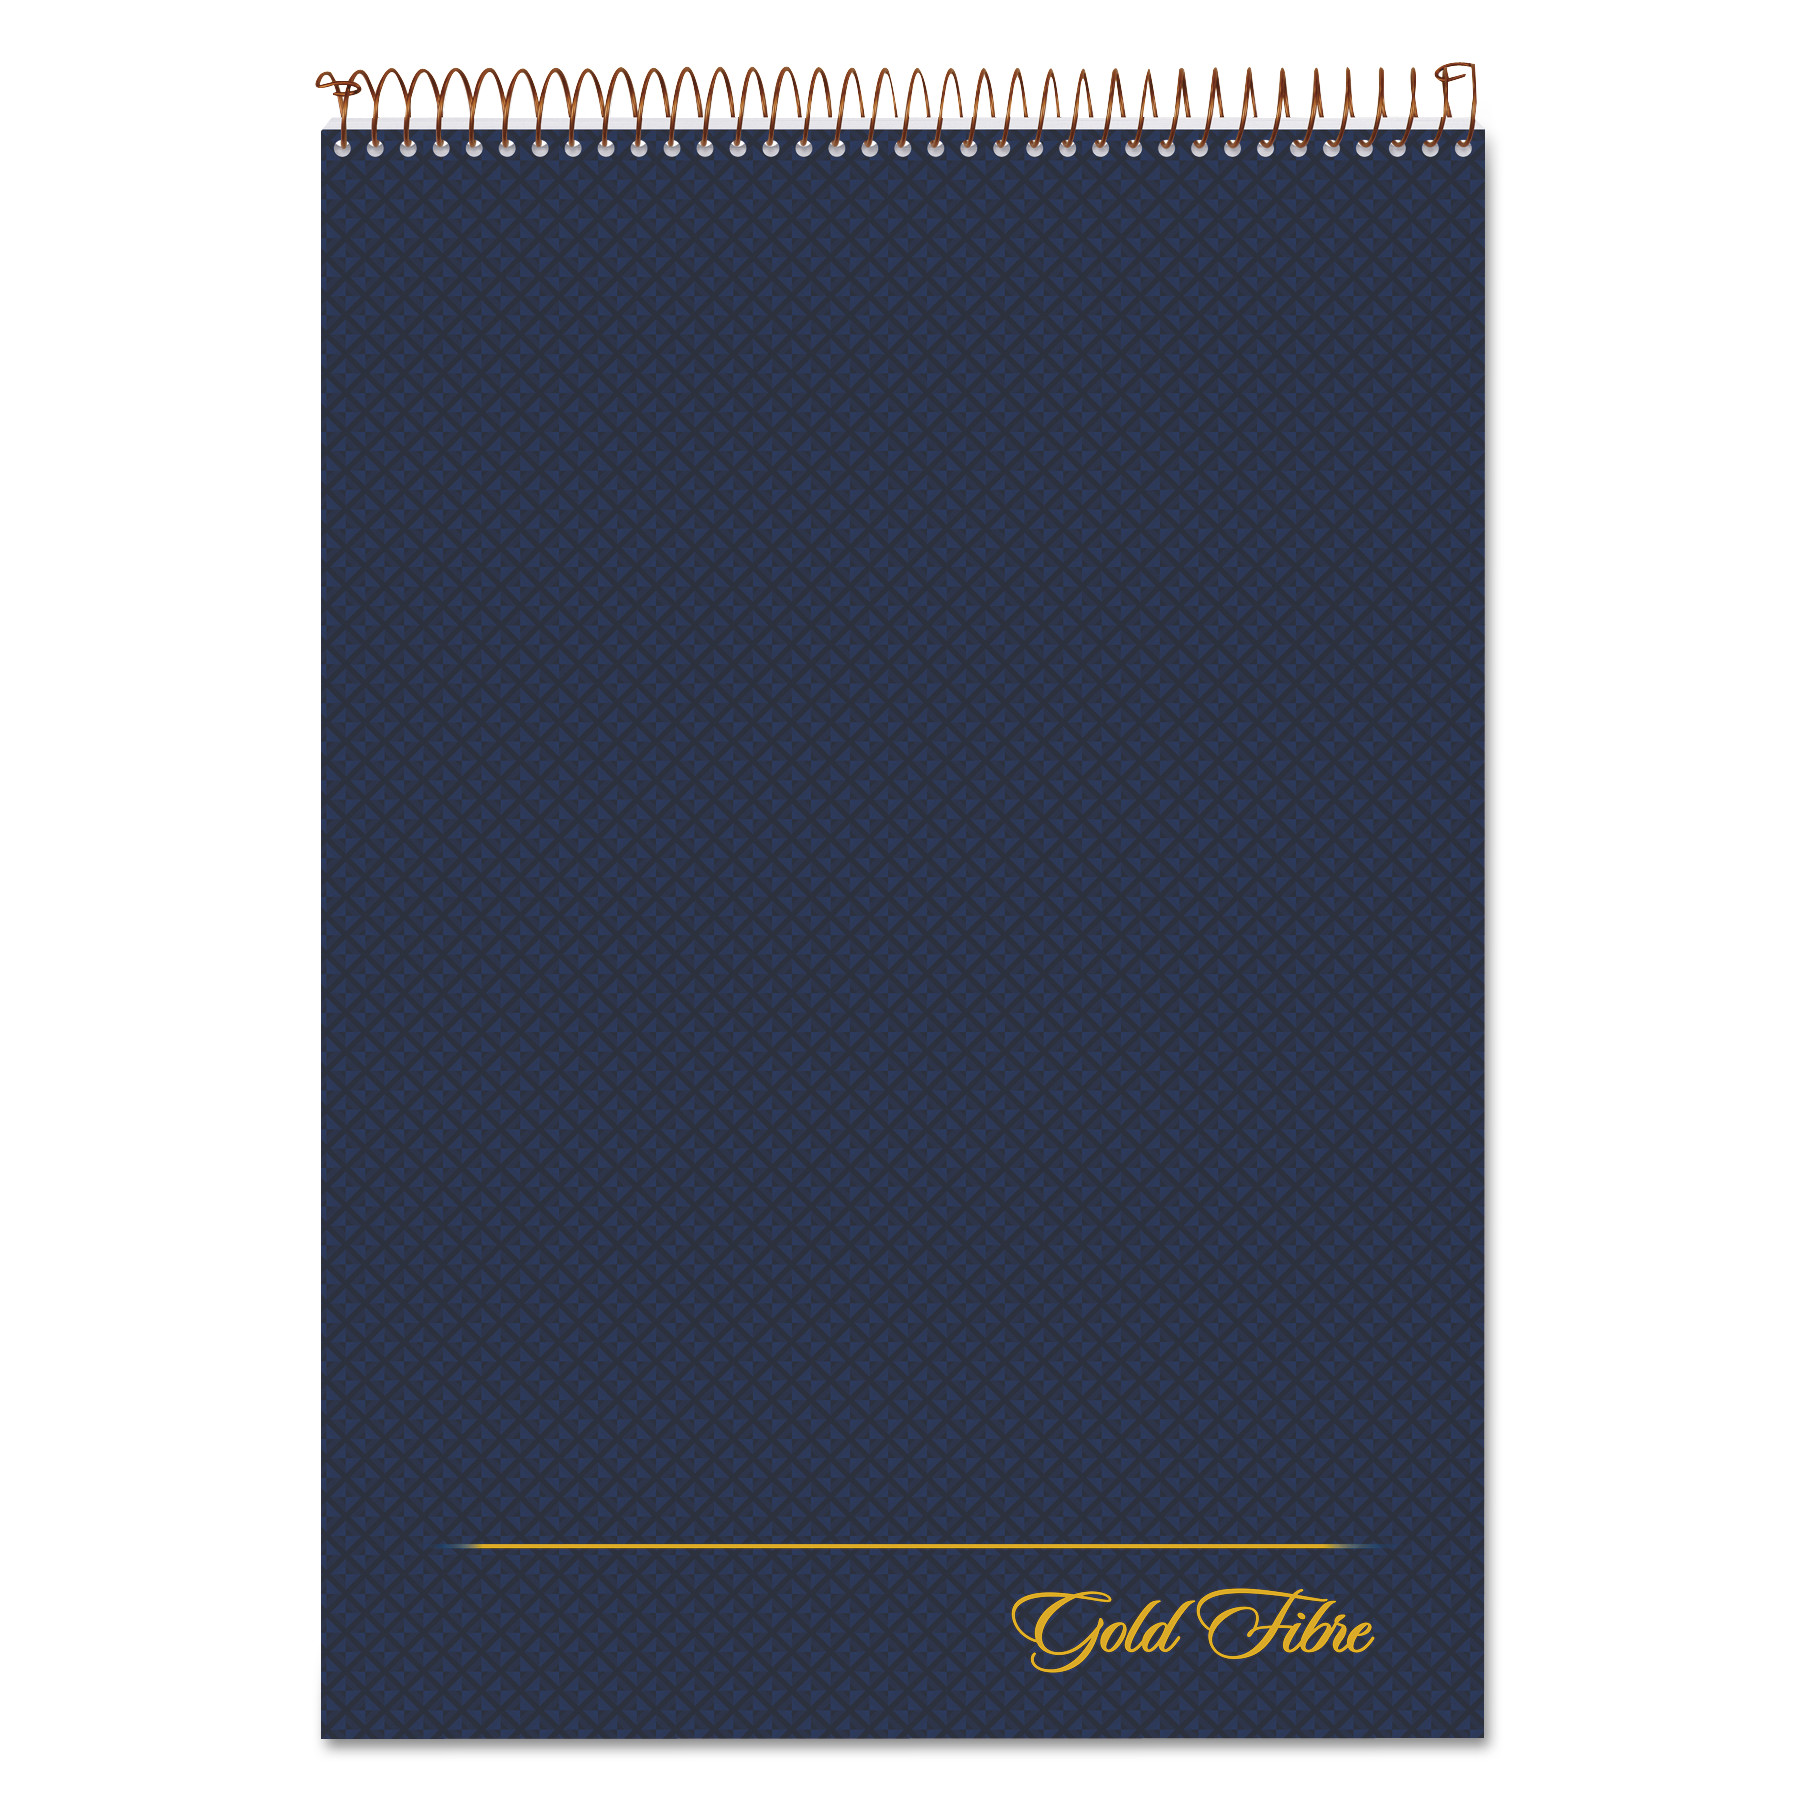  Ampad 20-815 Gold Fibre Wirebound Writing Pad w/ Cover, 1 Subject, Project Notes, Navy Cover, 8.5 x 11.75, 70 Sheets (TOP20815) 